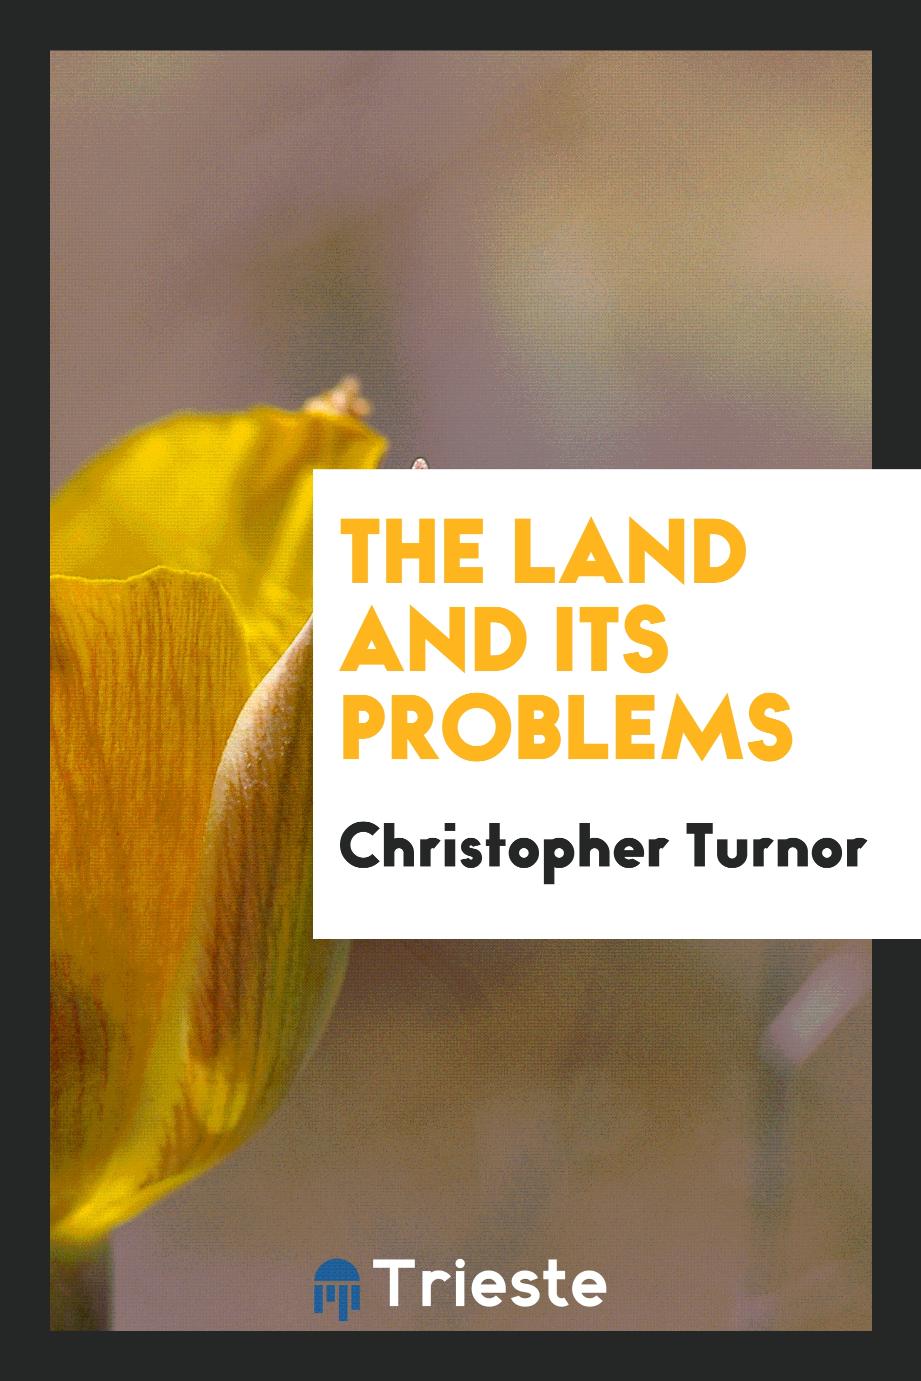 The land and its problems